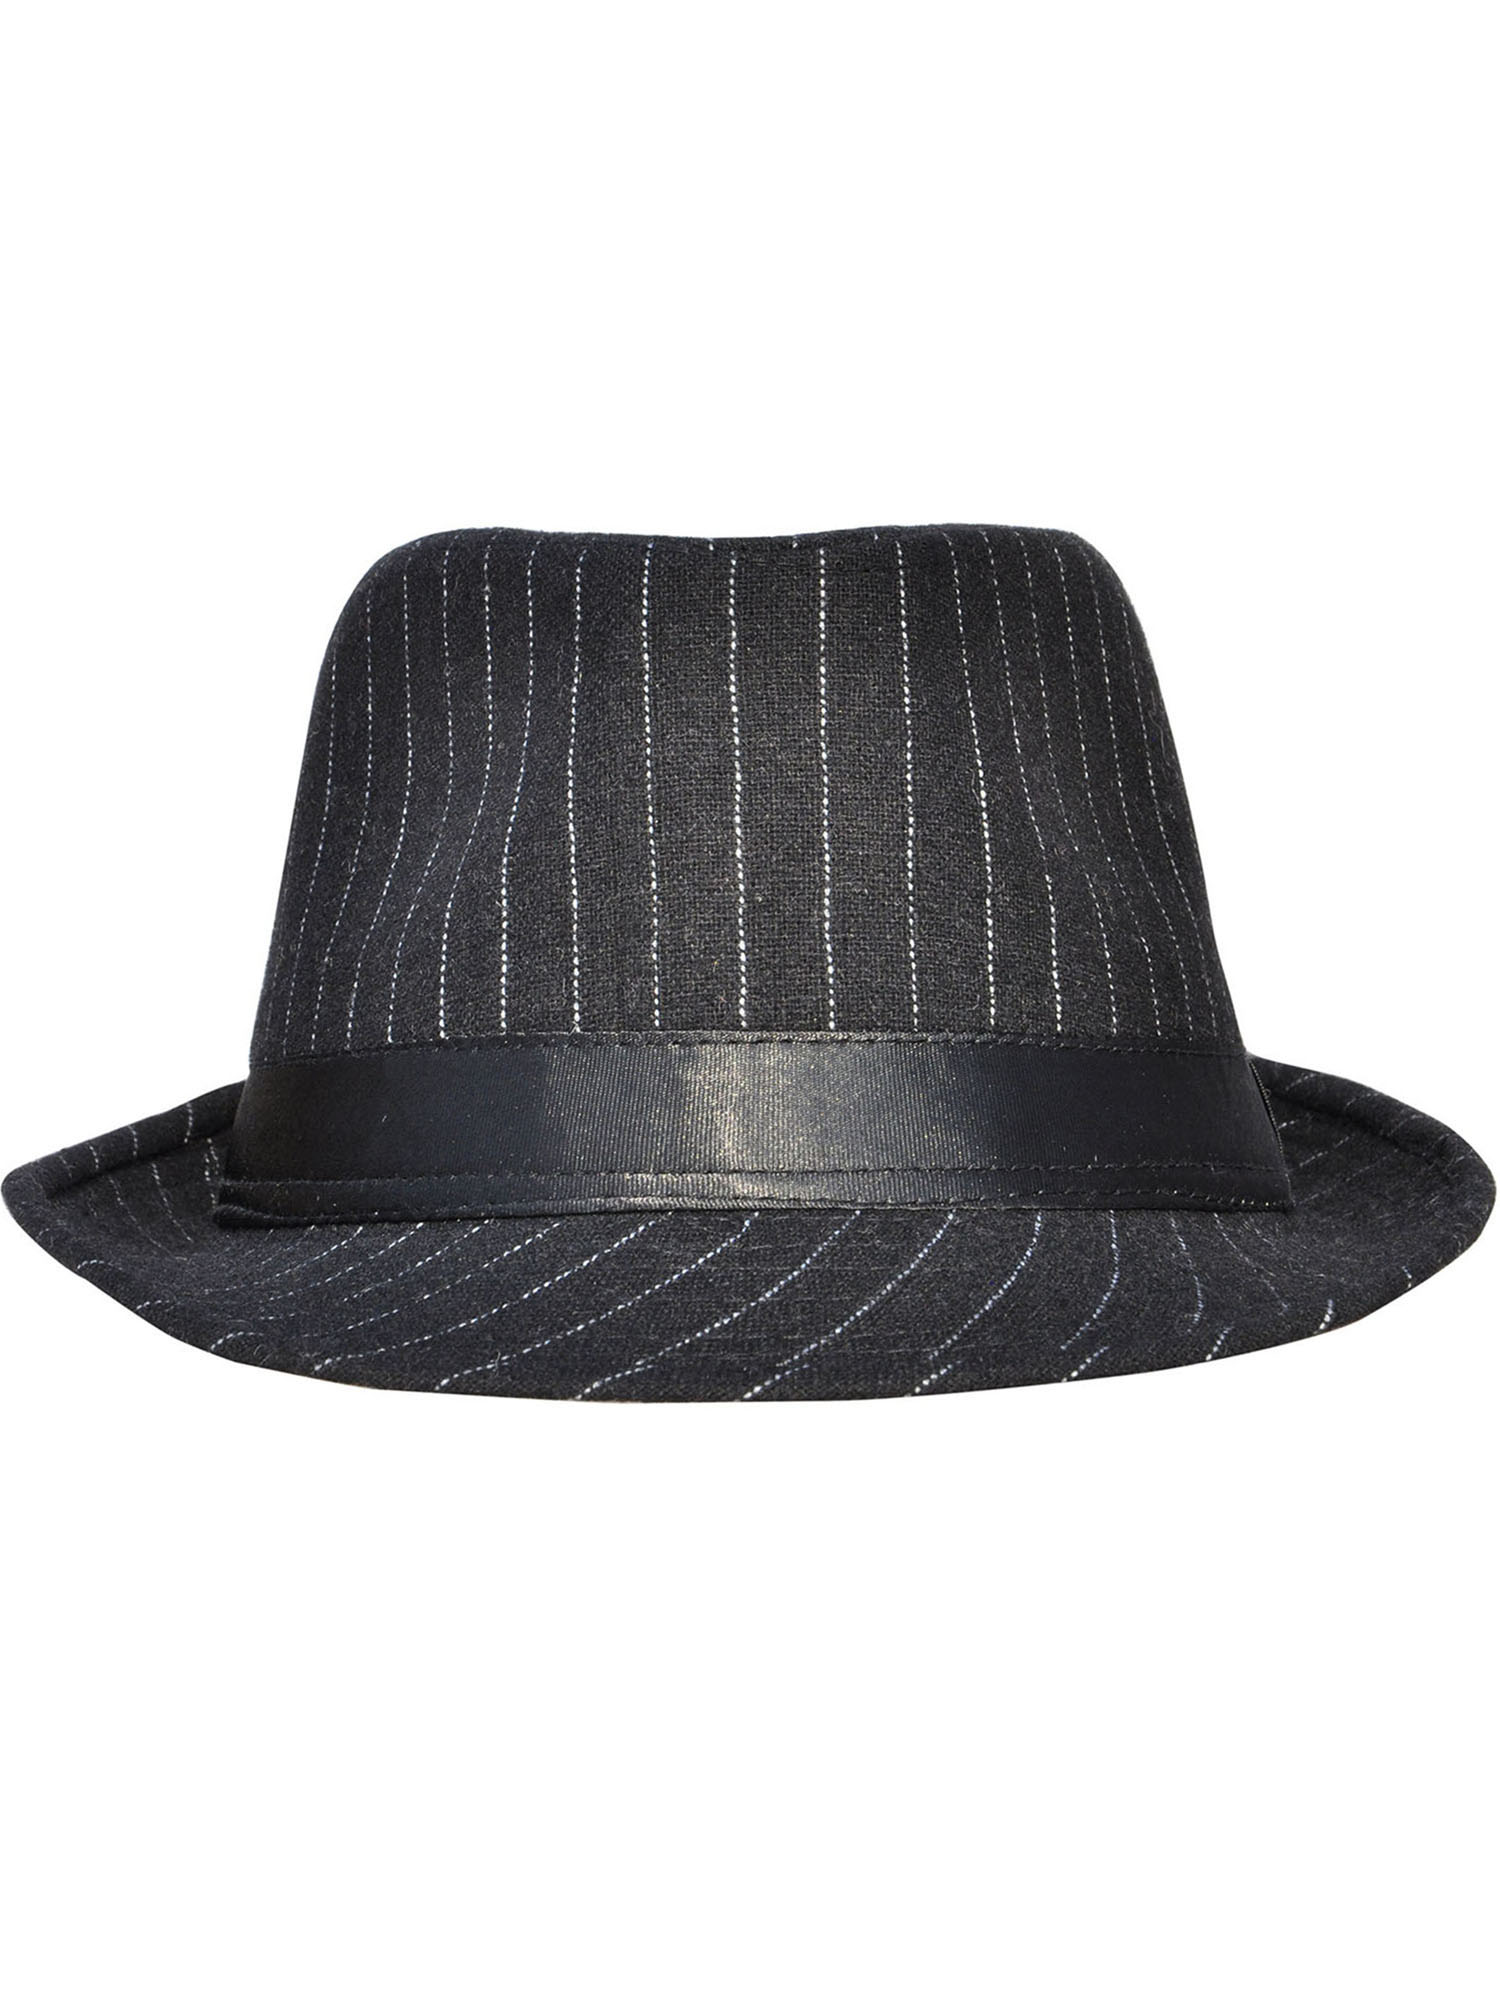 Mens Cool Fedora Trilby Hat Pinstripe with Black Band - image 2 of 4